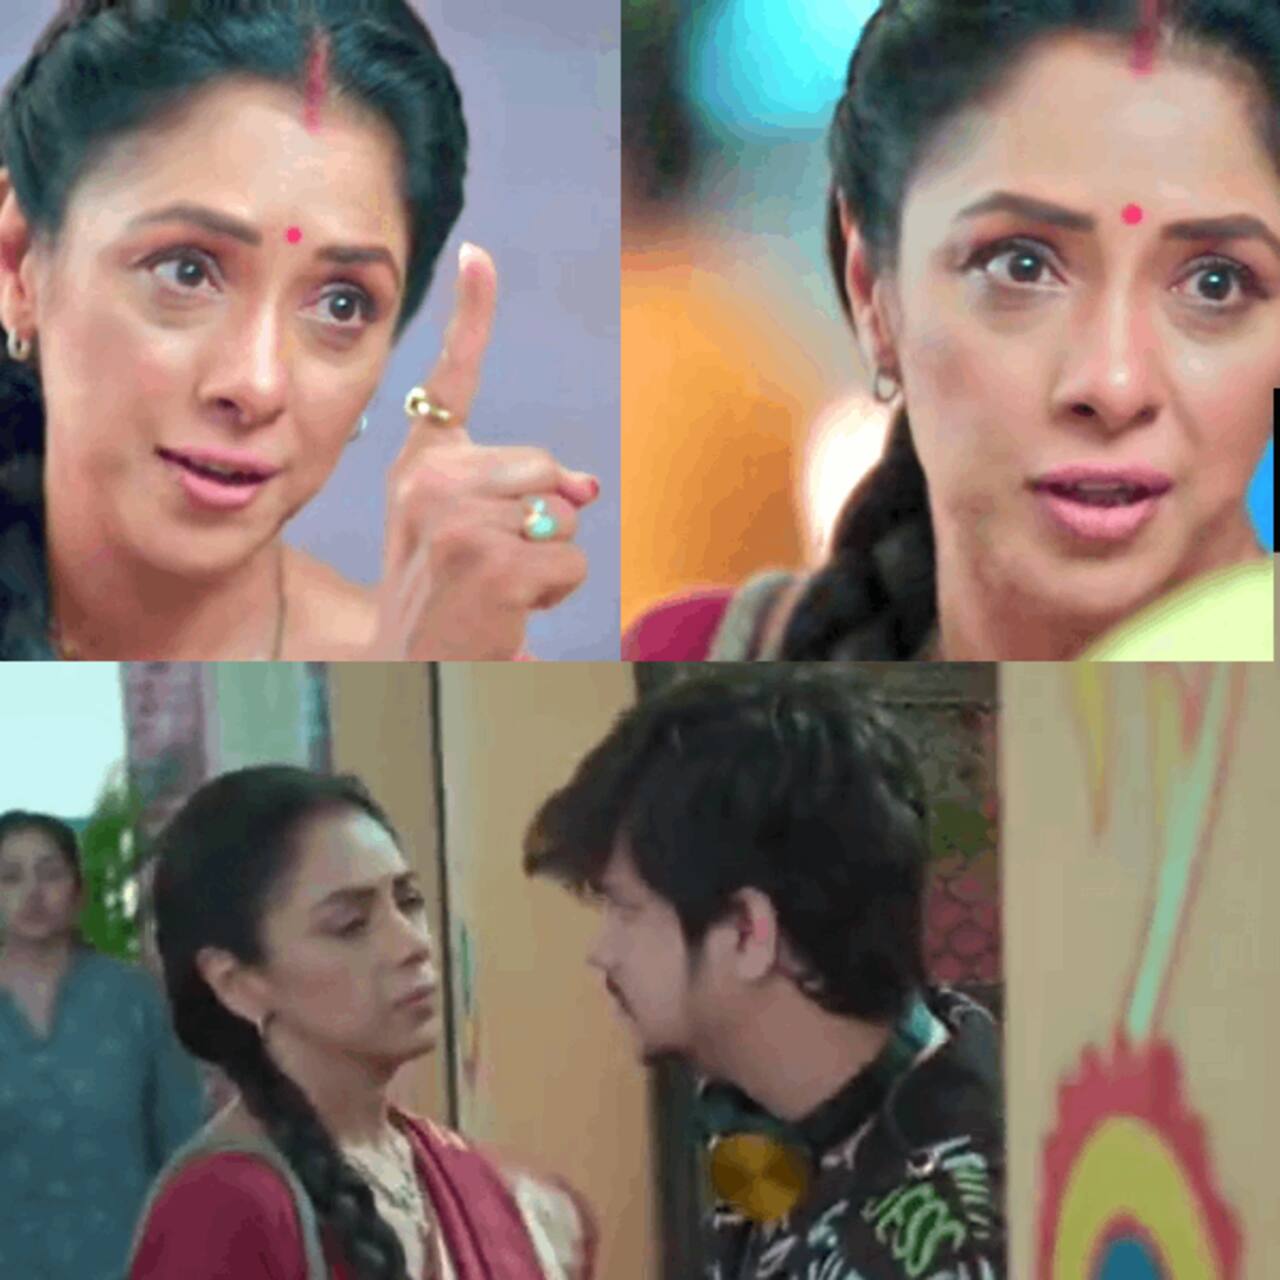 Anupamaa twist: Anu WARNS the r*pist of severe punishment as she seeks justice for Dimple; her bada*s avatar wins over MaAn fans [VIEW TWEETS]